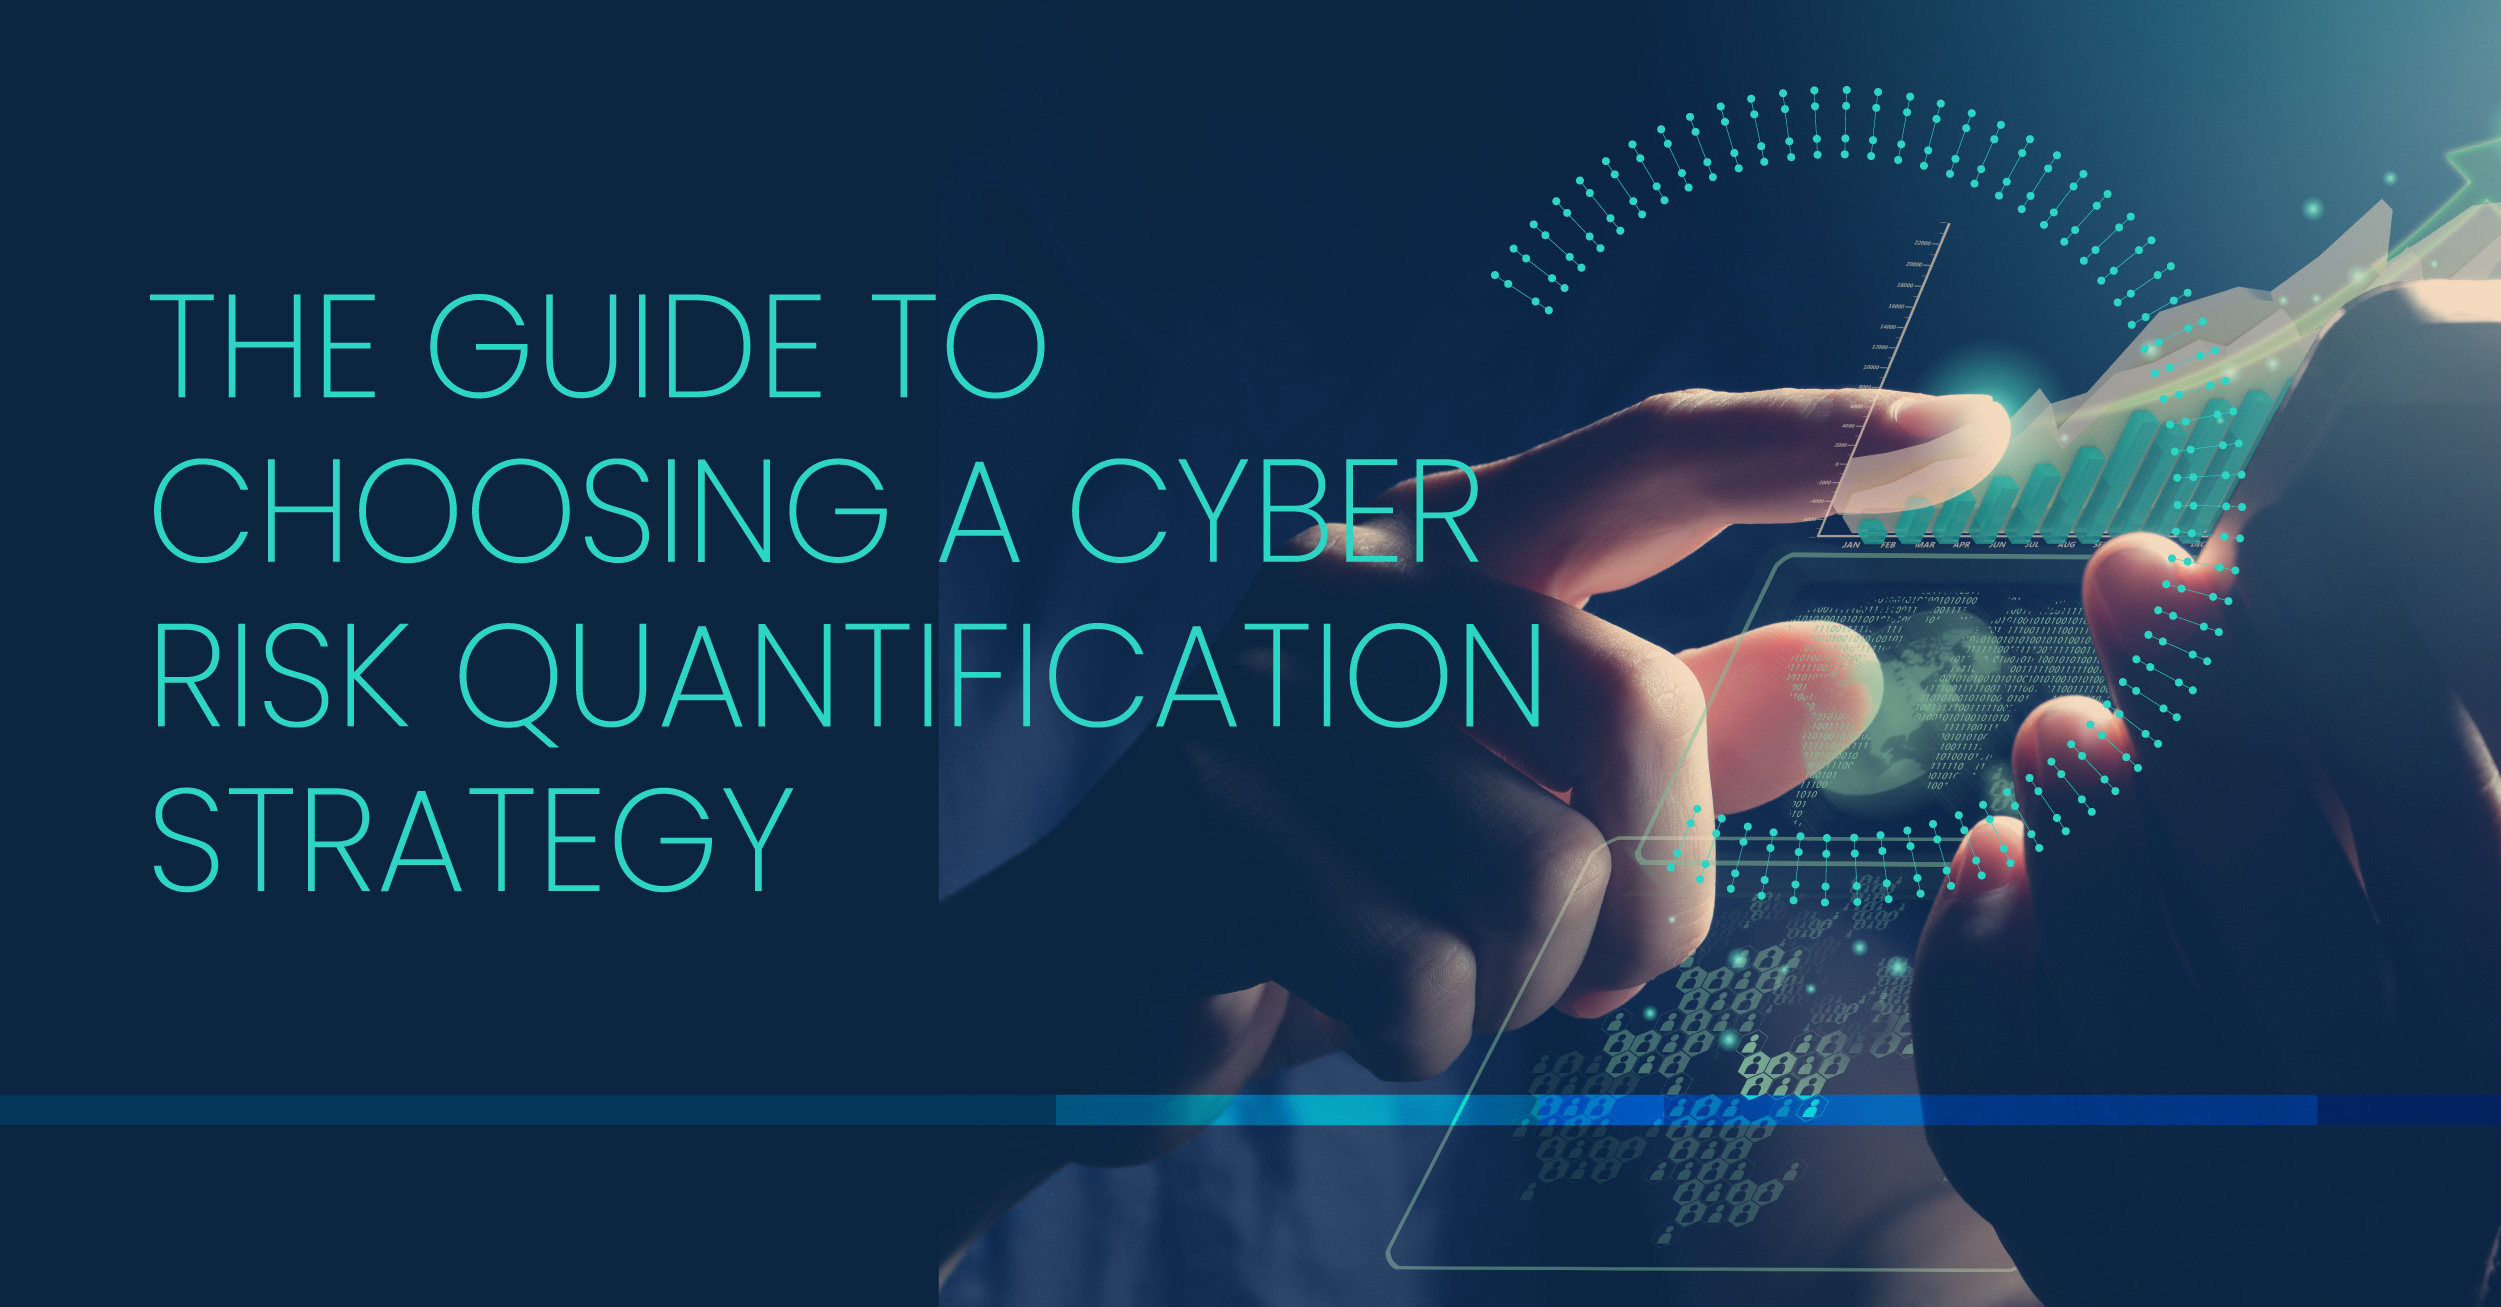 The Guide To Choosing A Cyber Risk Quantification Strategy